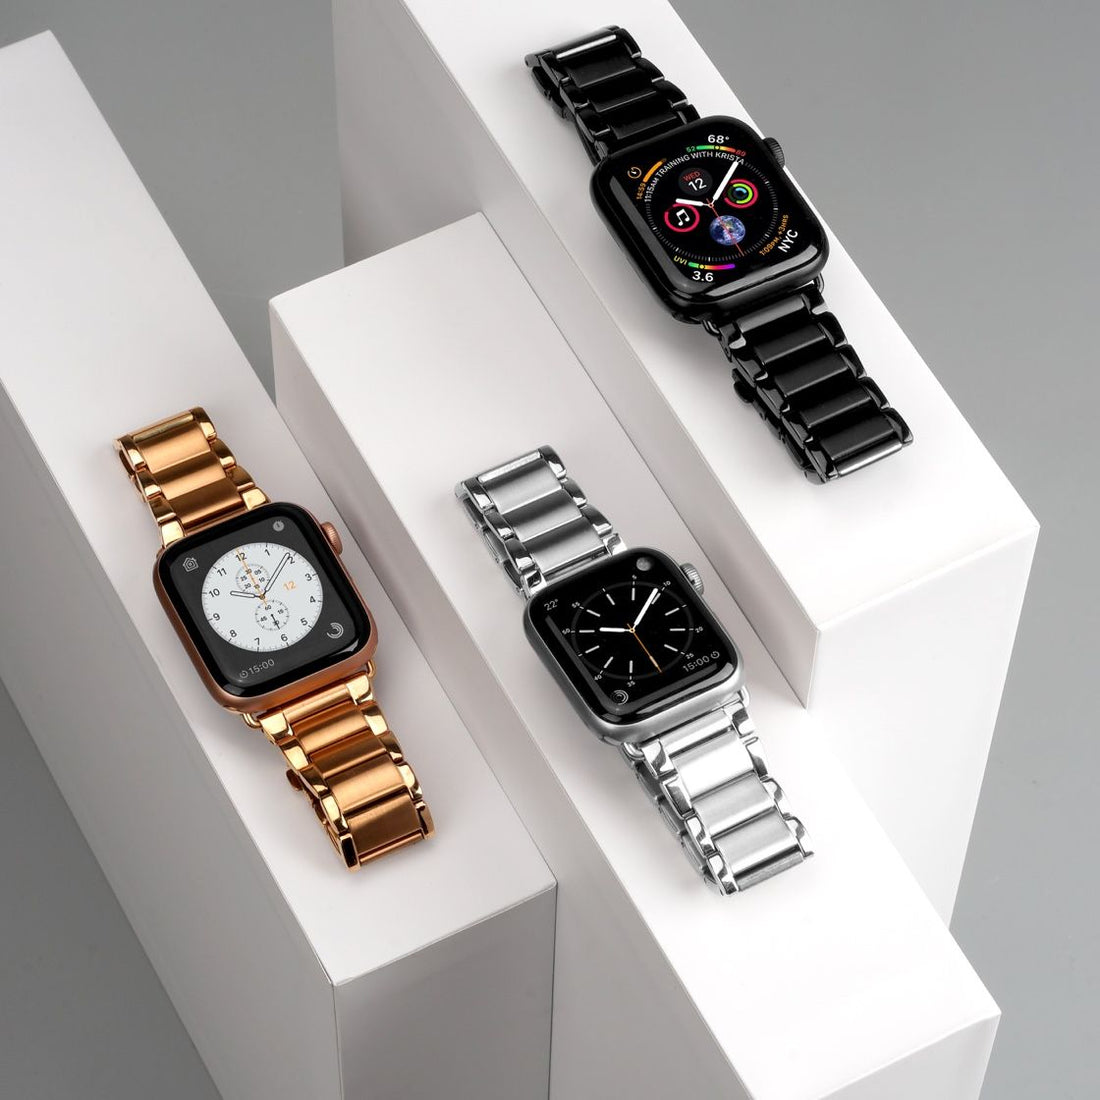 Which apple metallic watch band fits the best for apple watch?